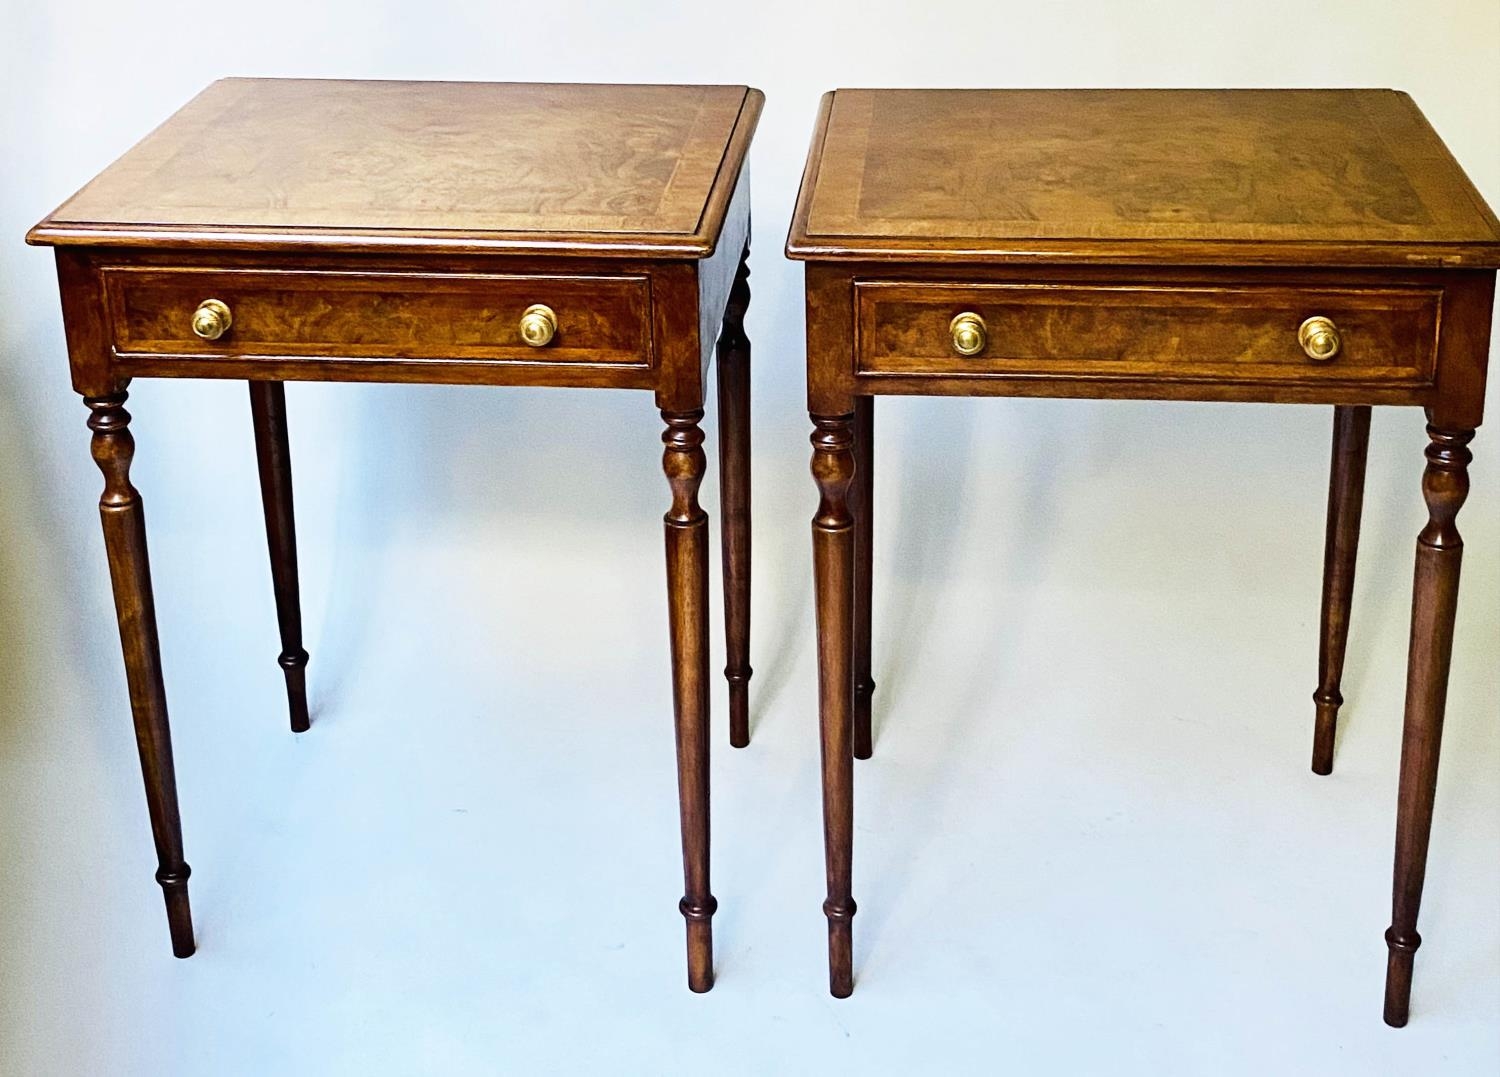 LAMP TABLES, a pair, George III style burr walnut and crossbanded each with a frieze drawer, 58cm - Image 2 of 6